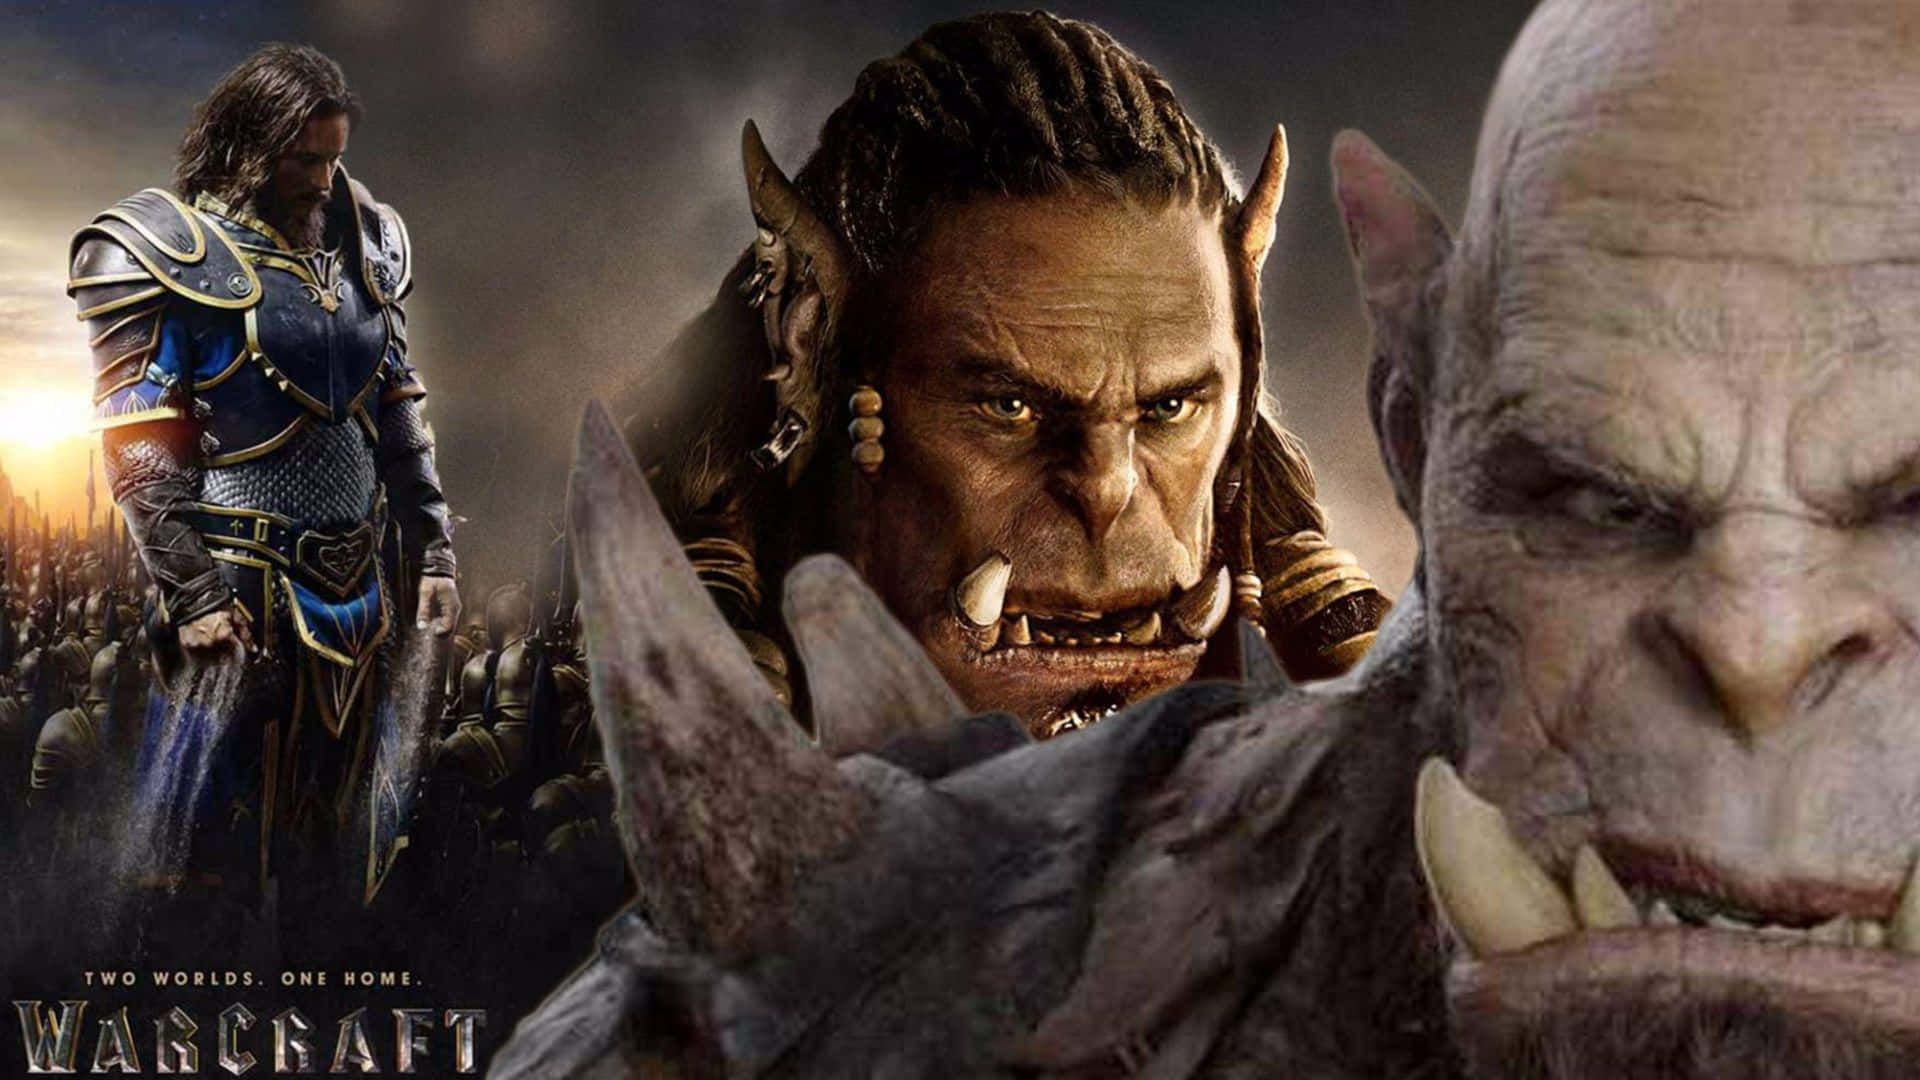 Captivating Scene From Warcraft Movie Wallpaper